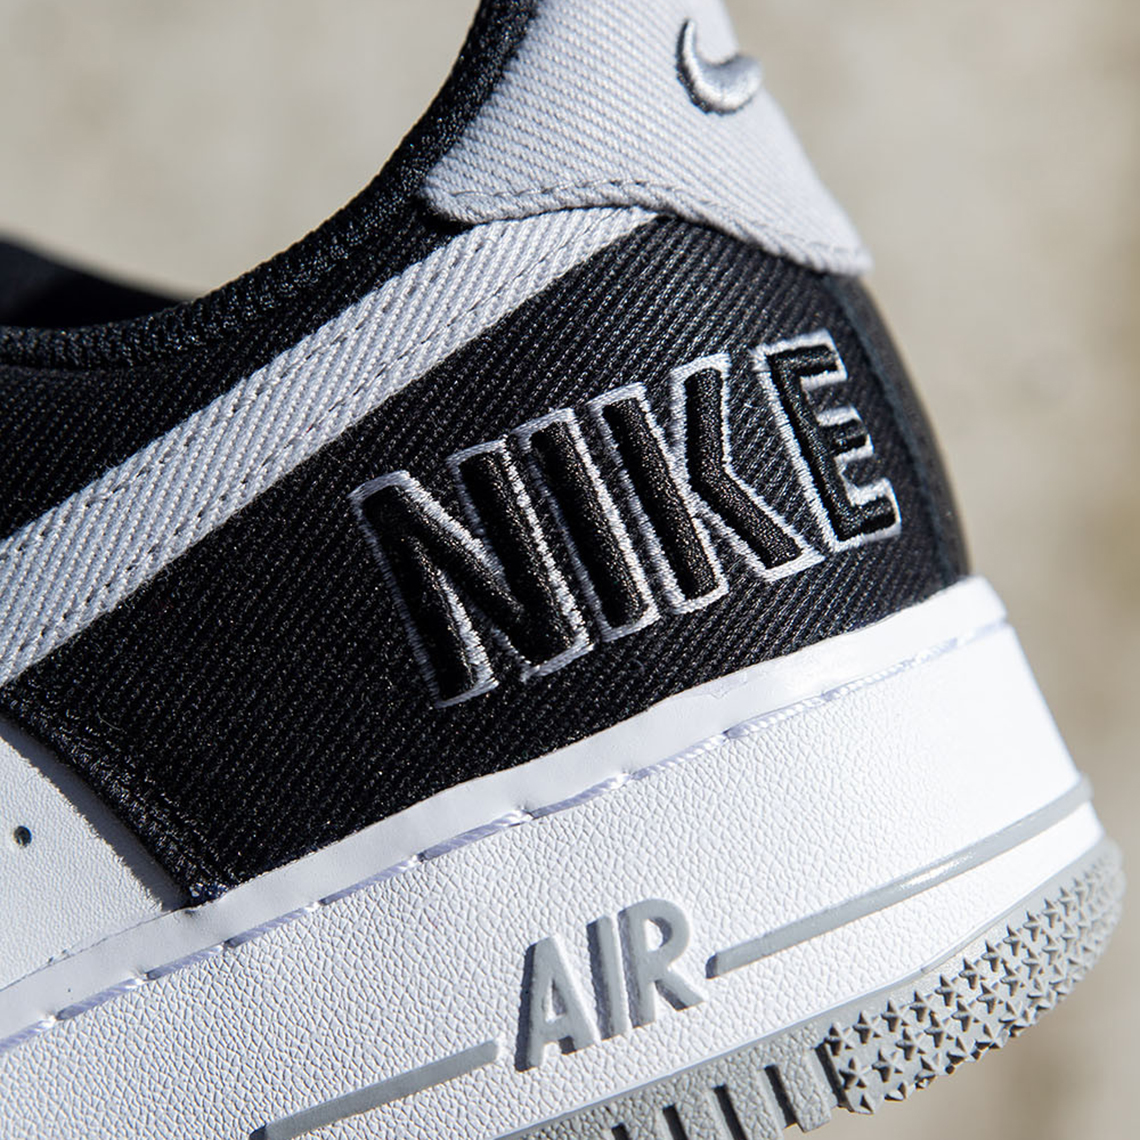 Nike Air Force 1 Ct2301 001 Release Info 7